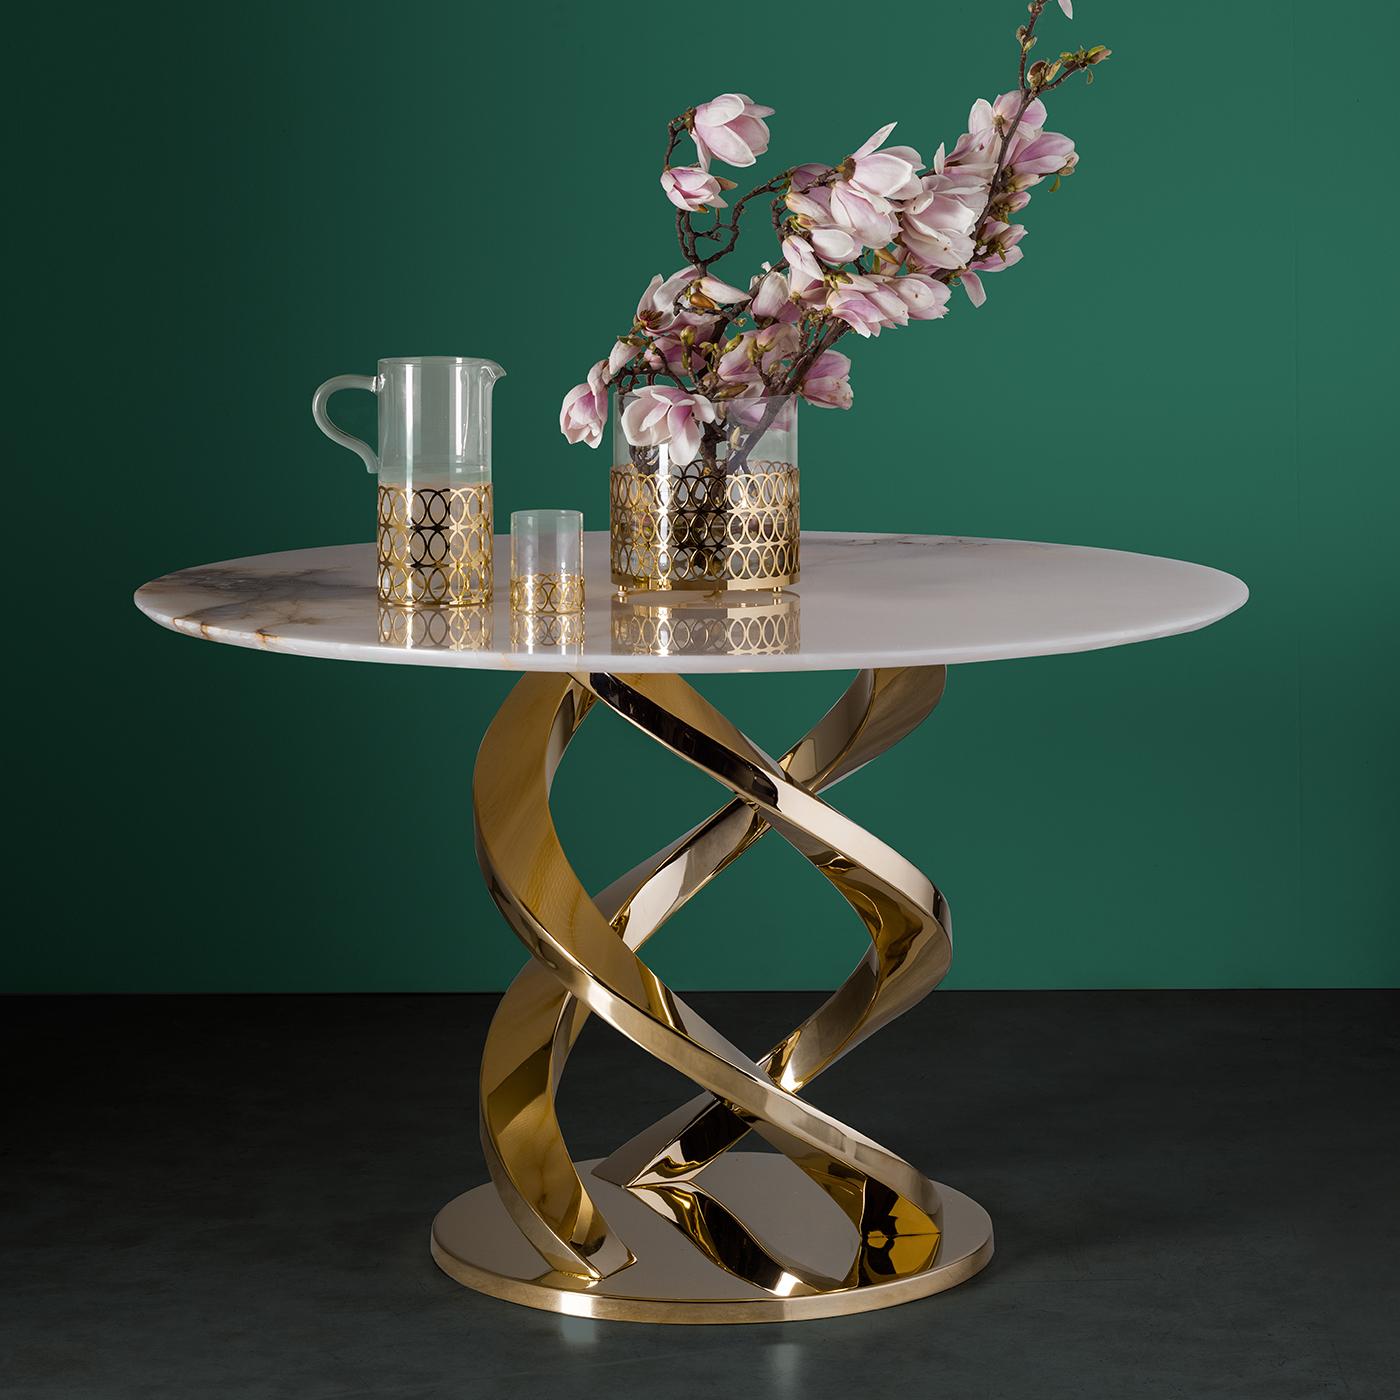 Italian Cerberus Dining Table with Onyx Gold Marble Top